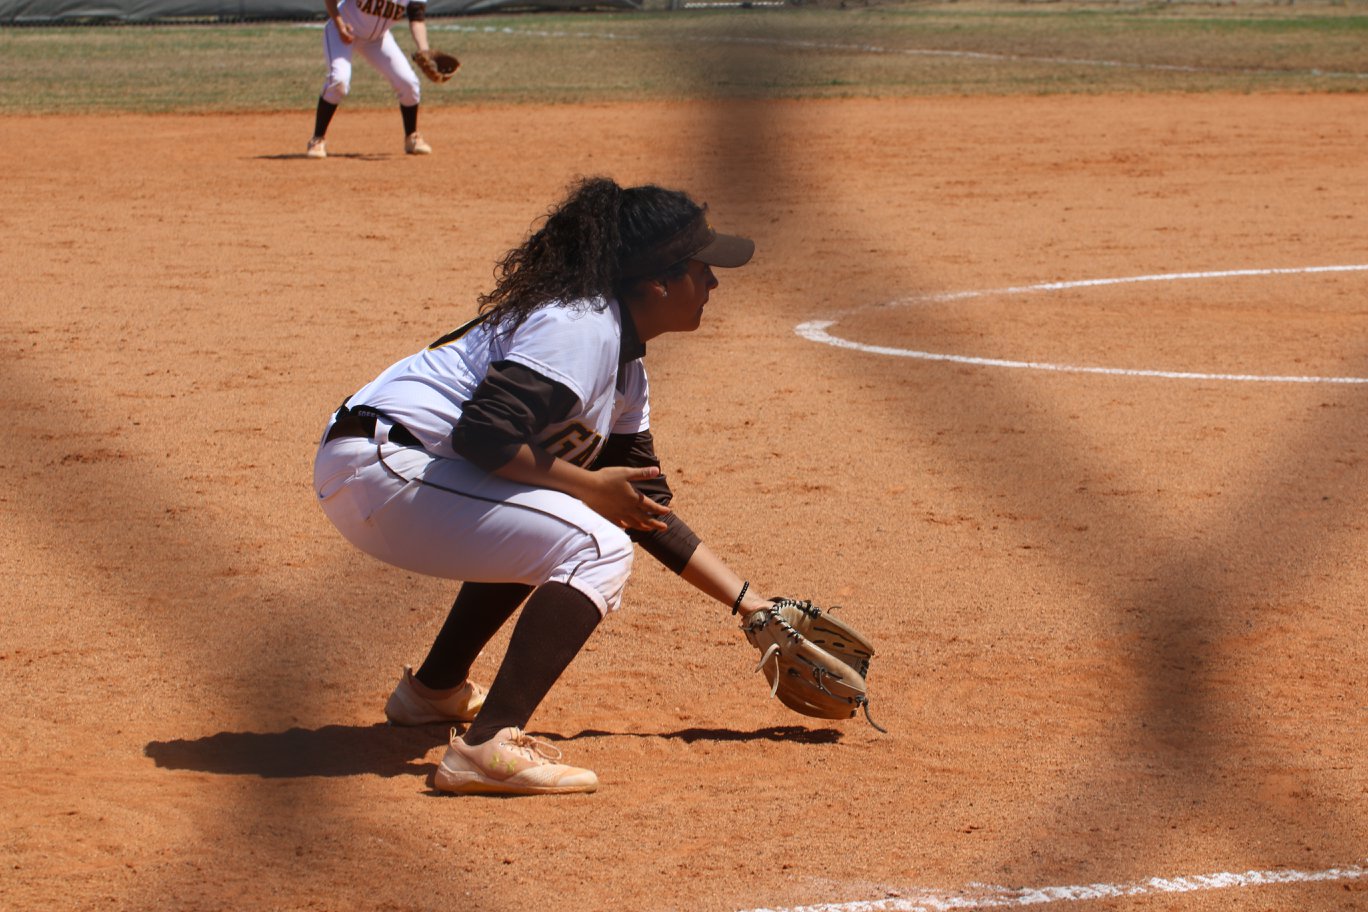 Broncbusters fall in Region VI Tournament